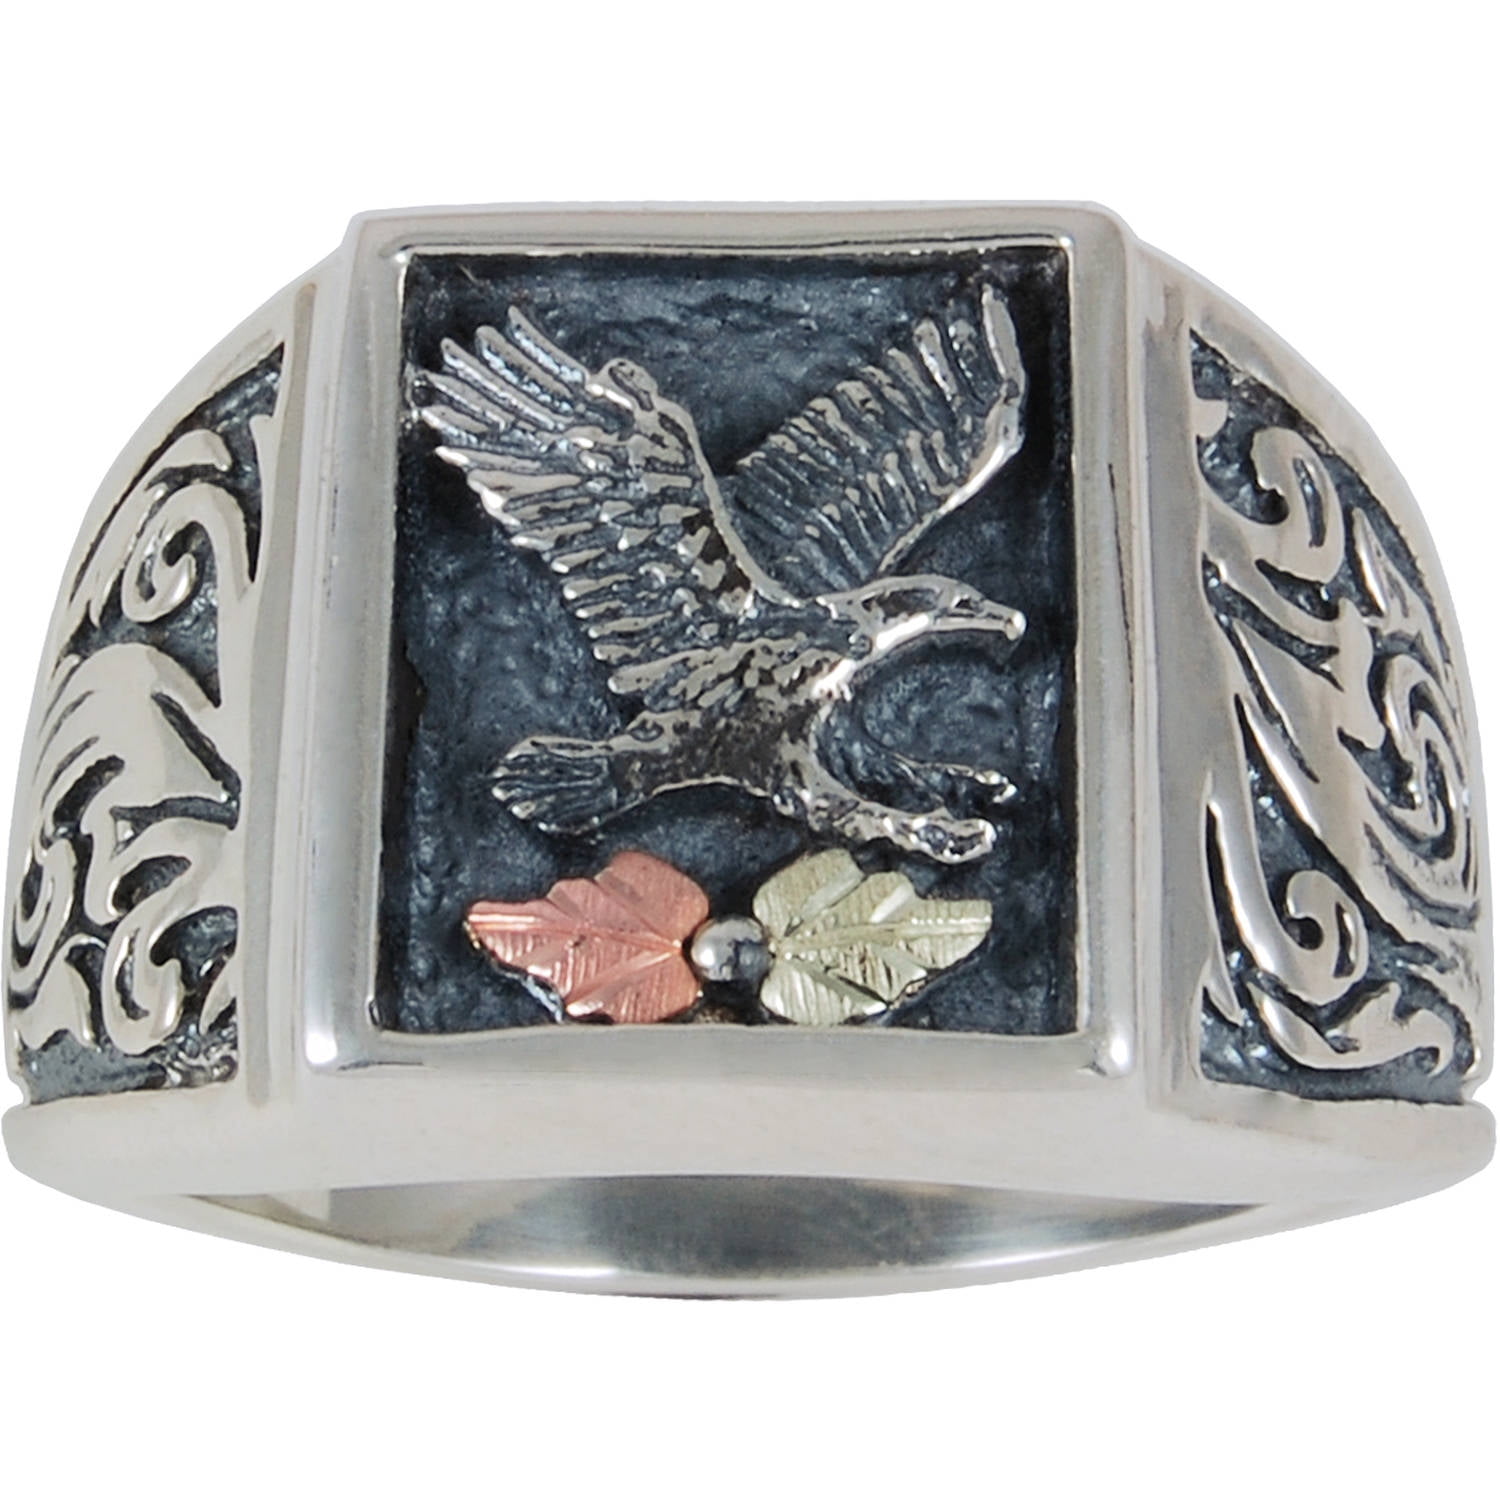 EAGLE 18K GOLD OVER STERLING SILVER RING ROUND  ALL SIZES 8 9 10 11 12 13